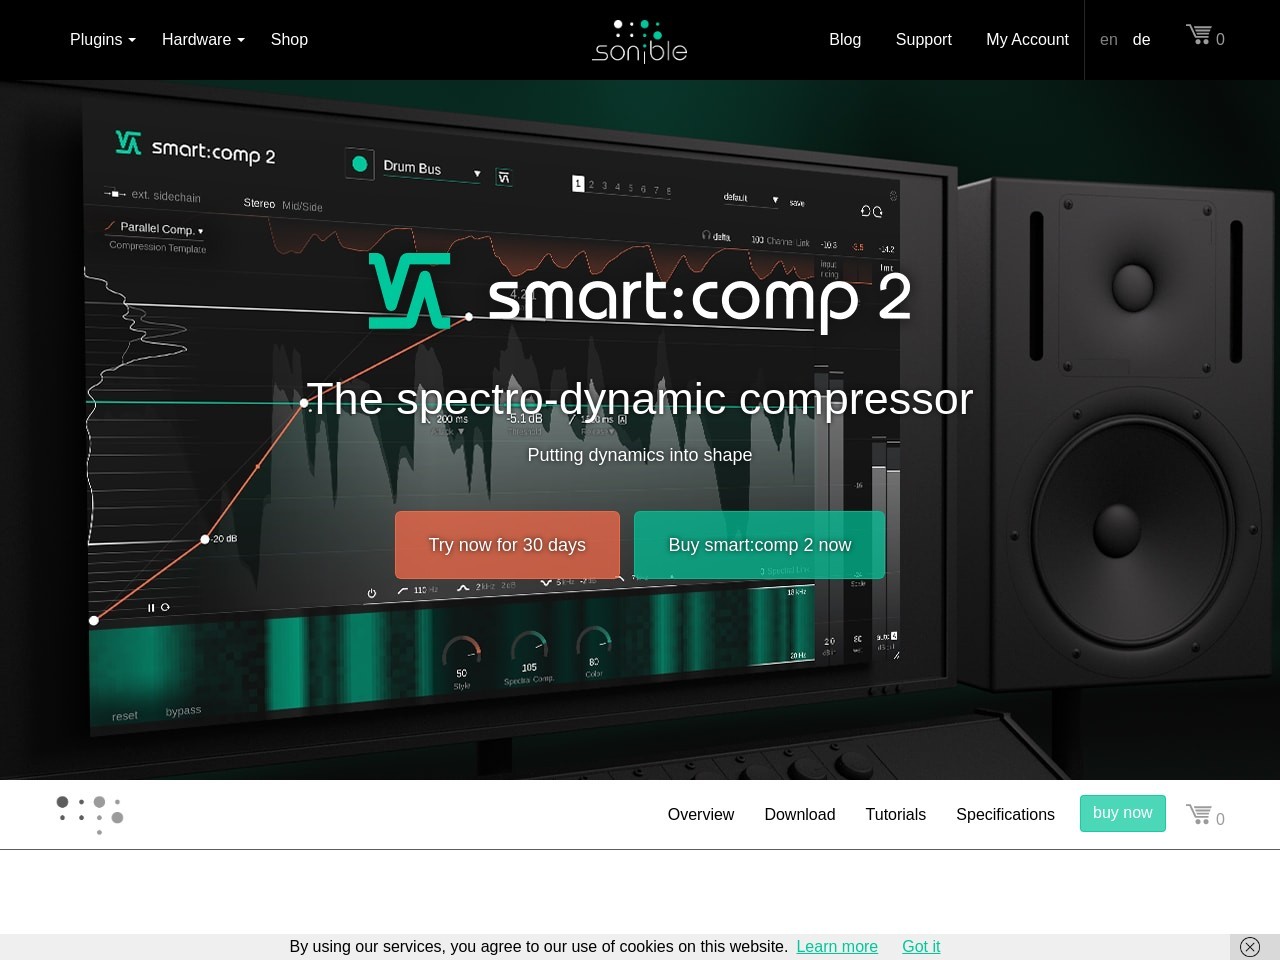 smart:comp 2 by sonible - the spectro-dynamic compressor - 30-day trial